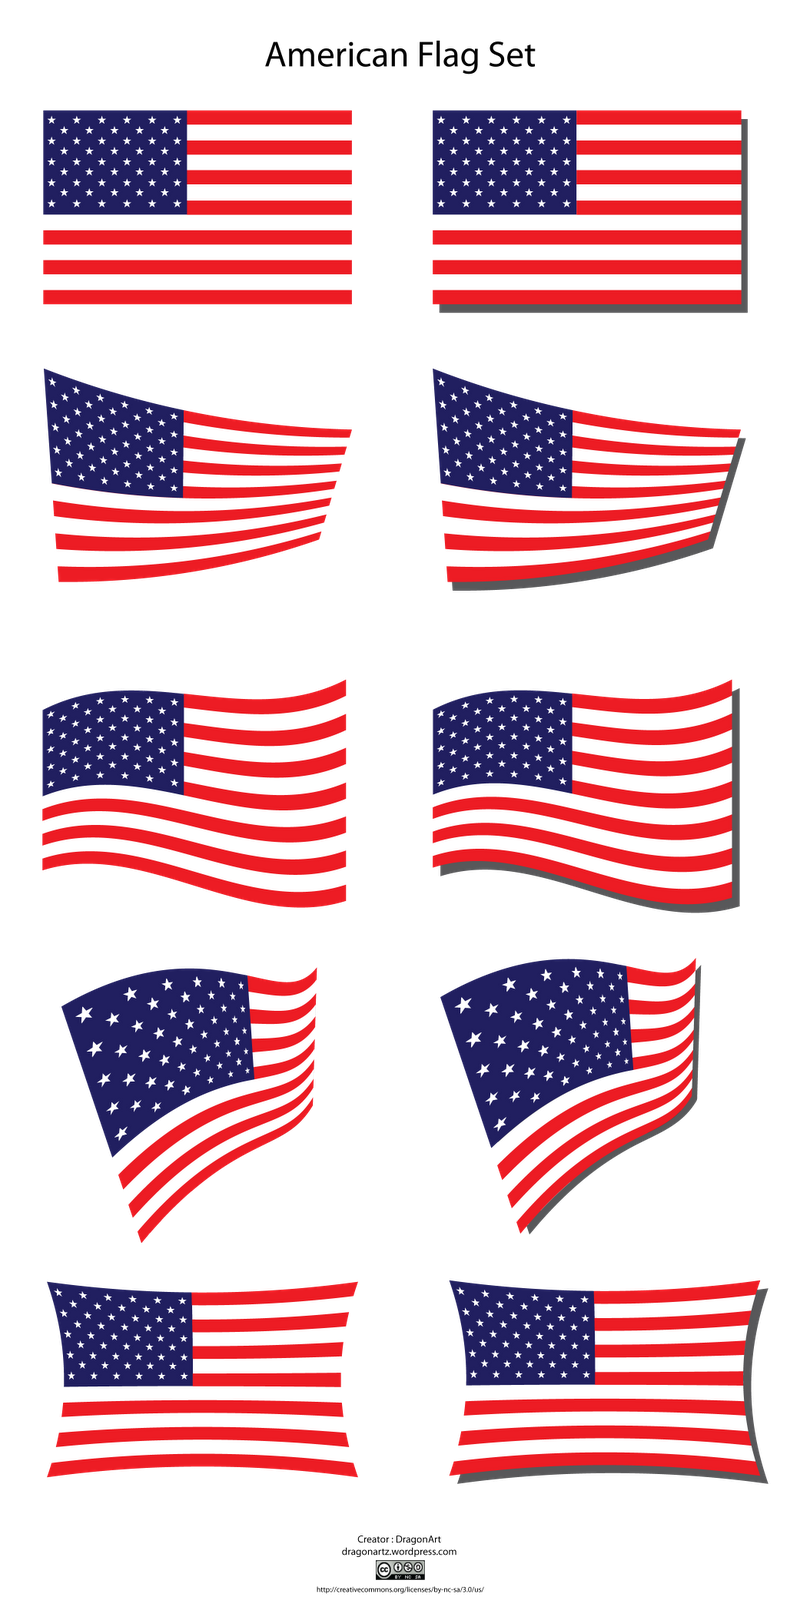 Faded american flag clipart vectpr